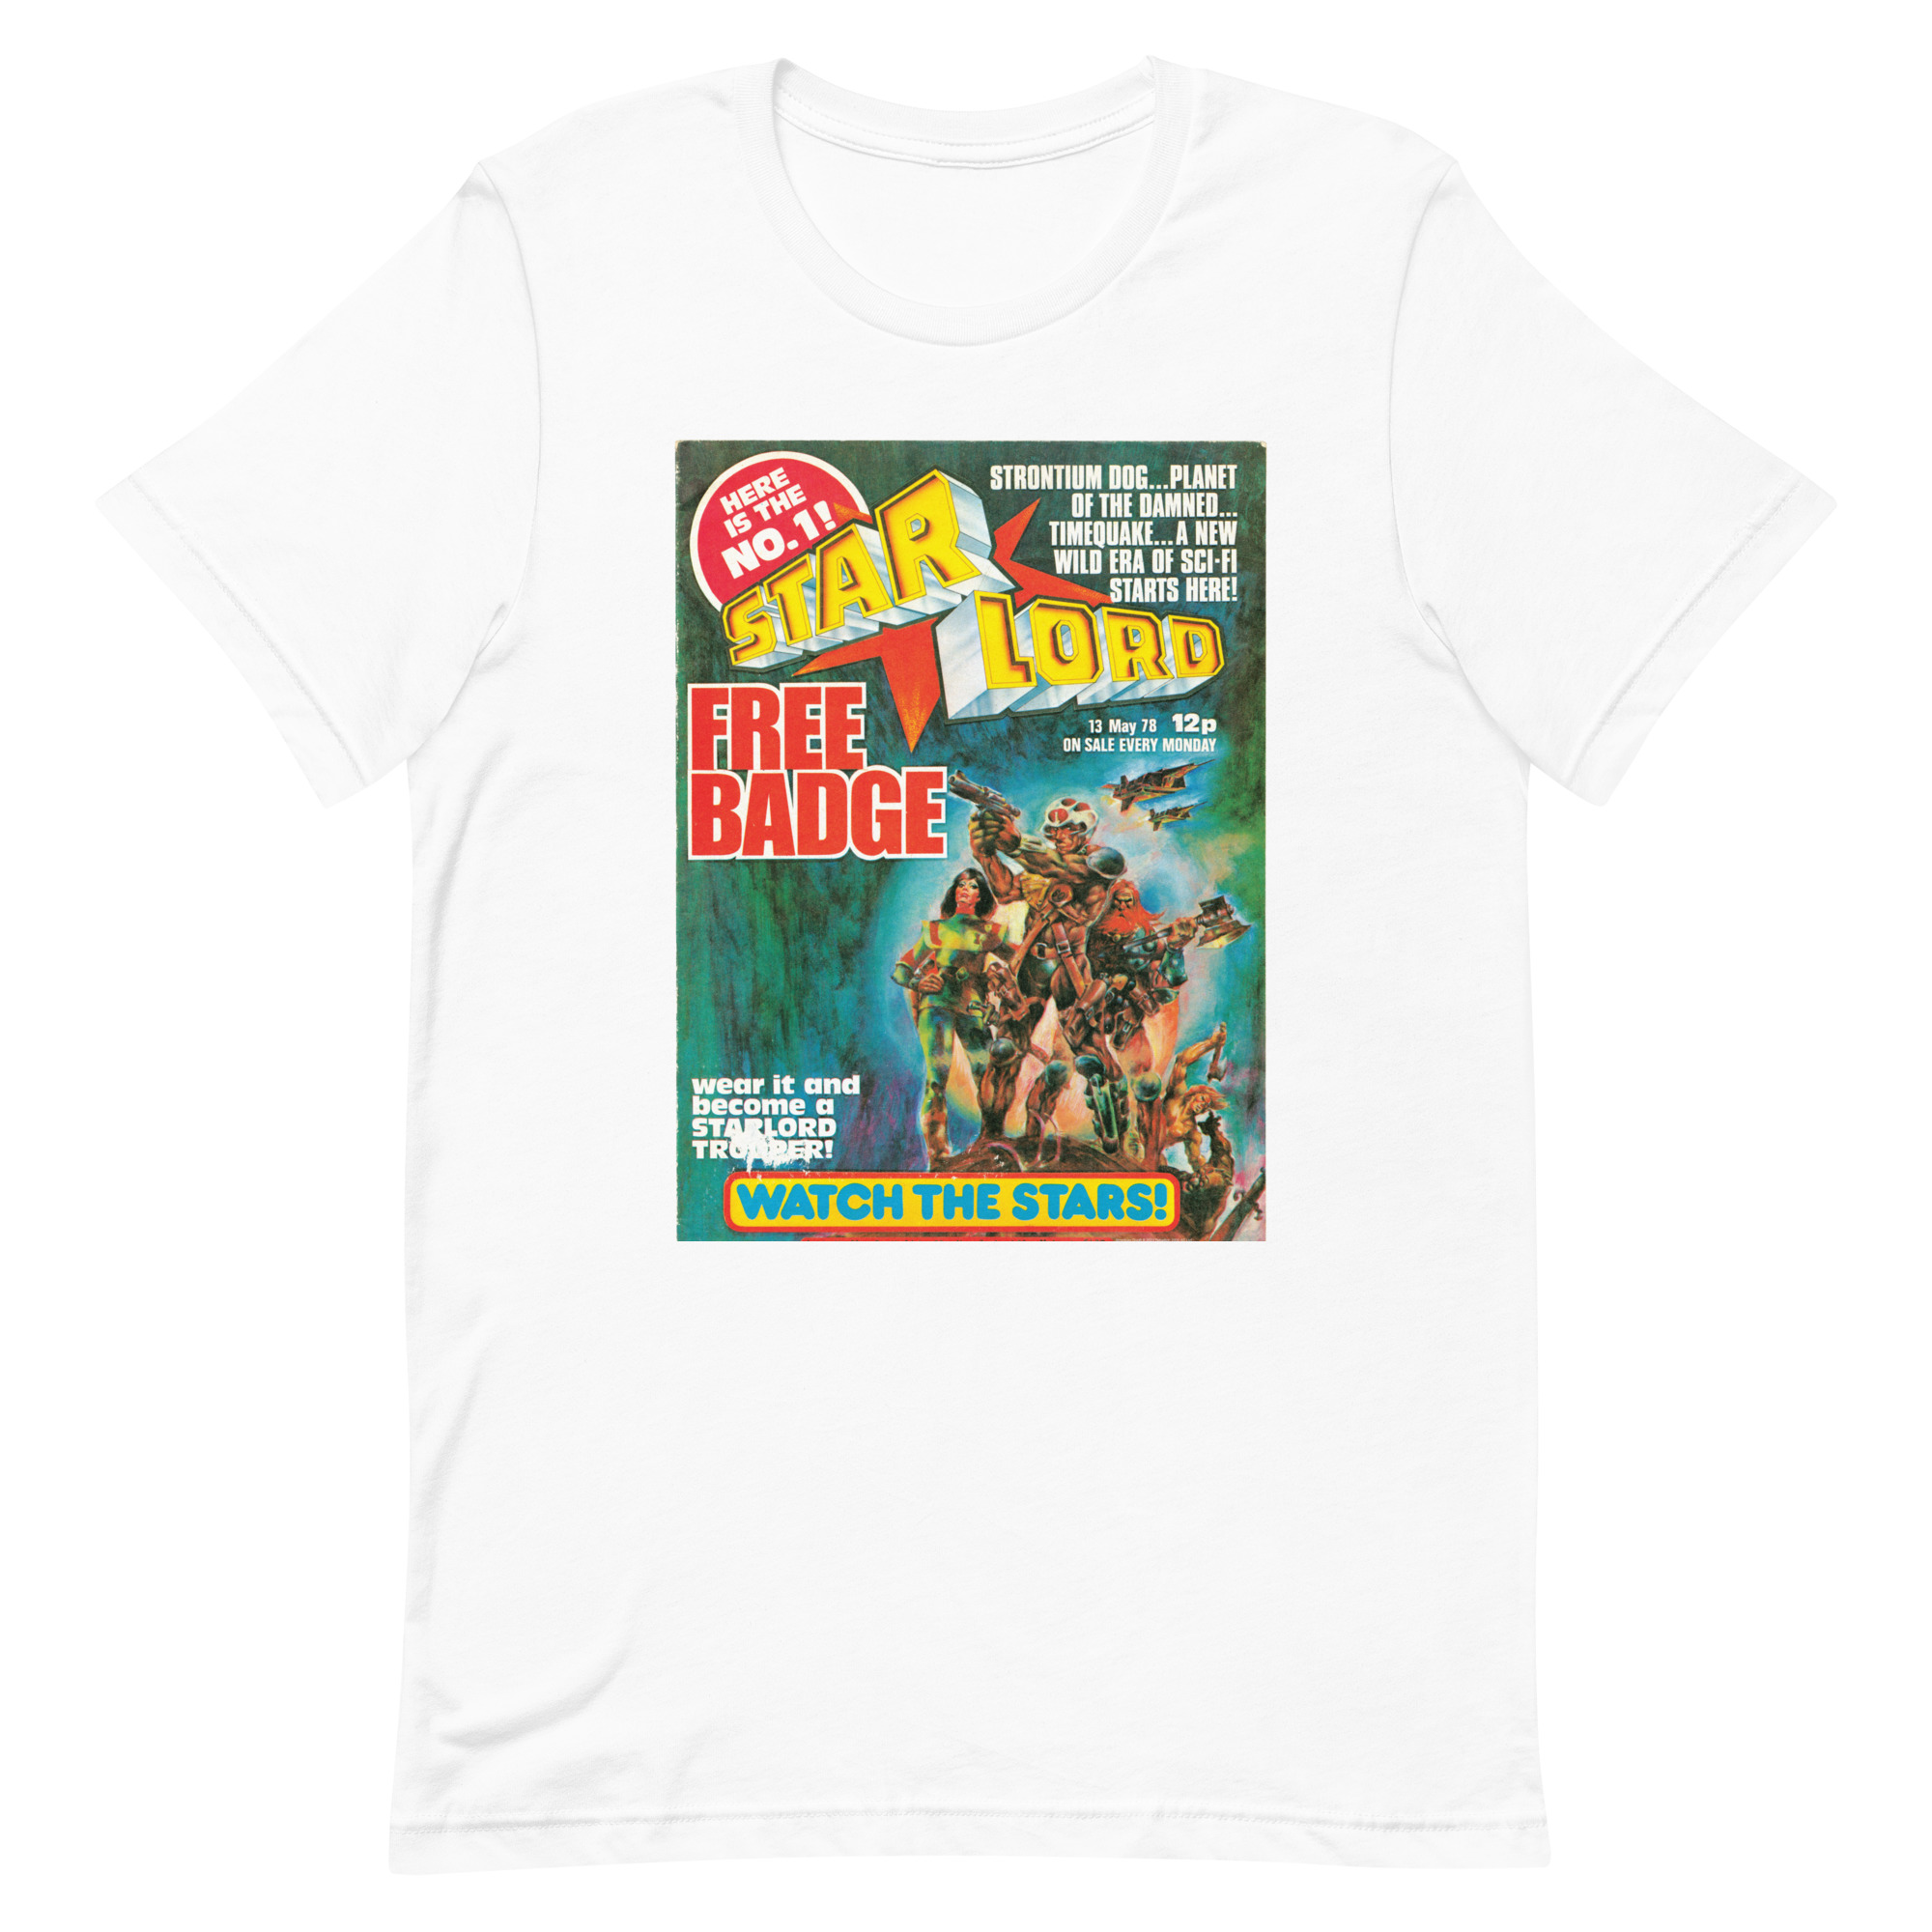 Starlord #1 T-Shirt (White)